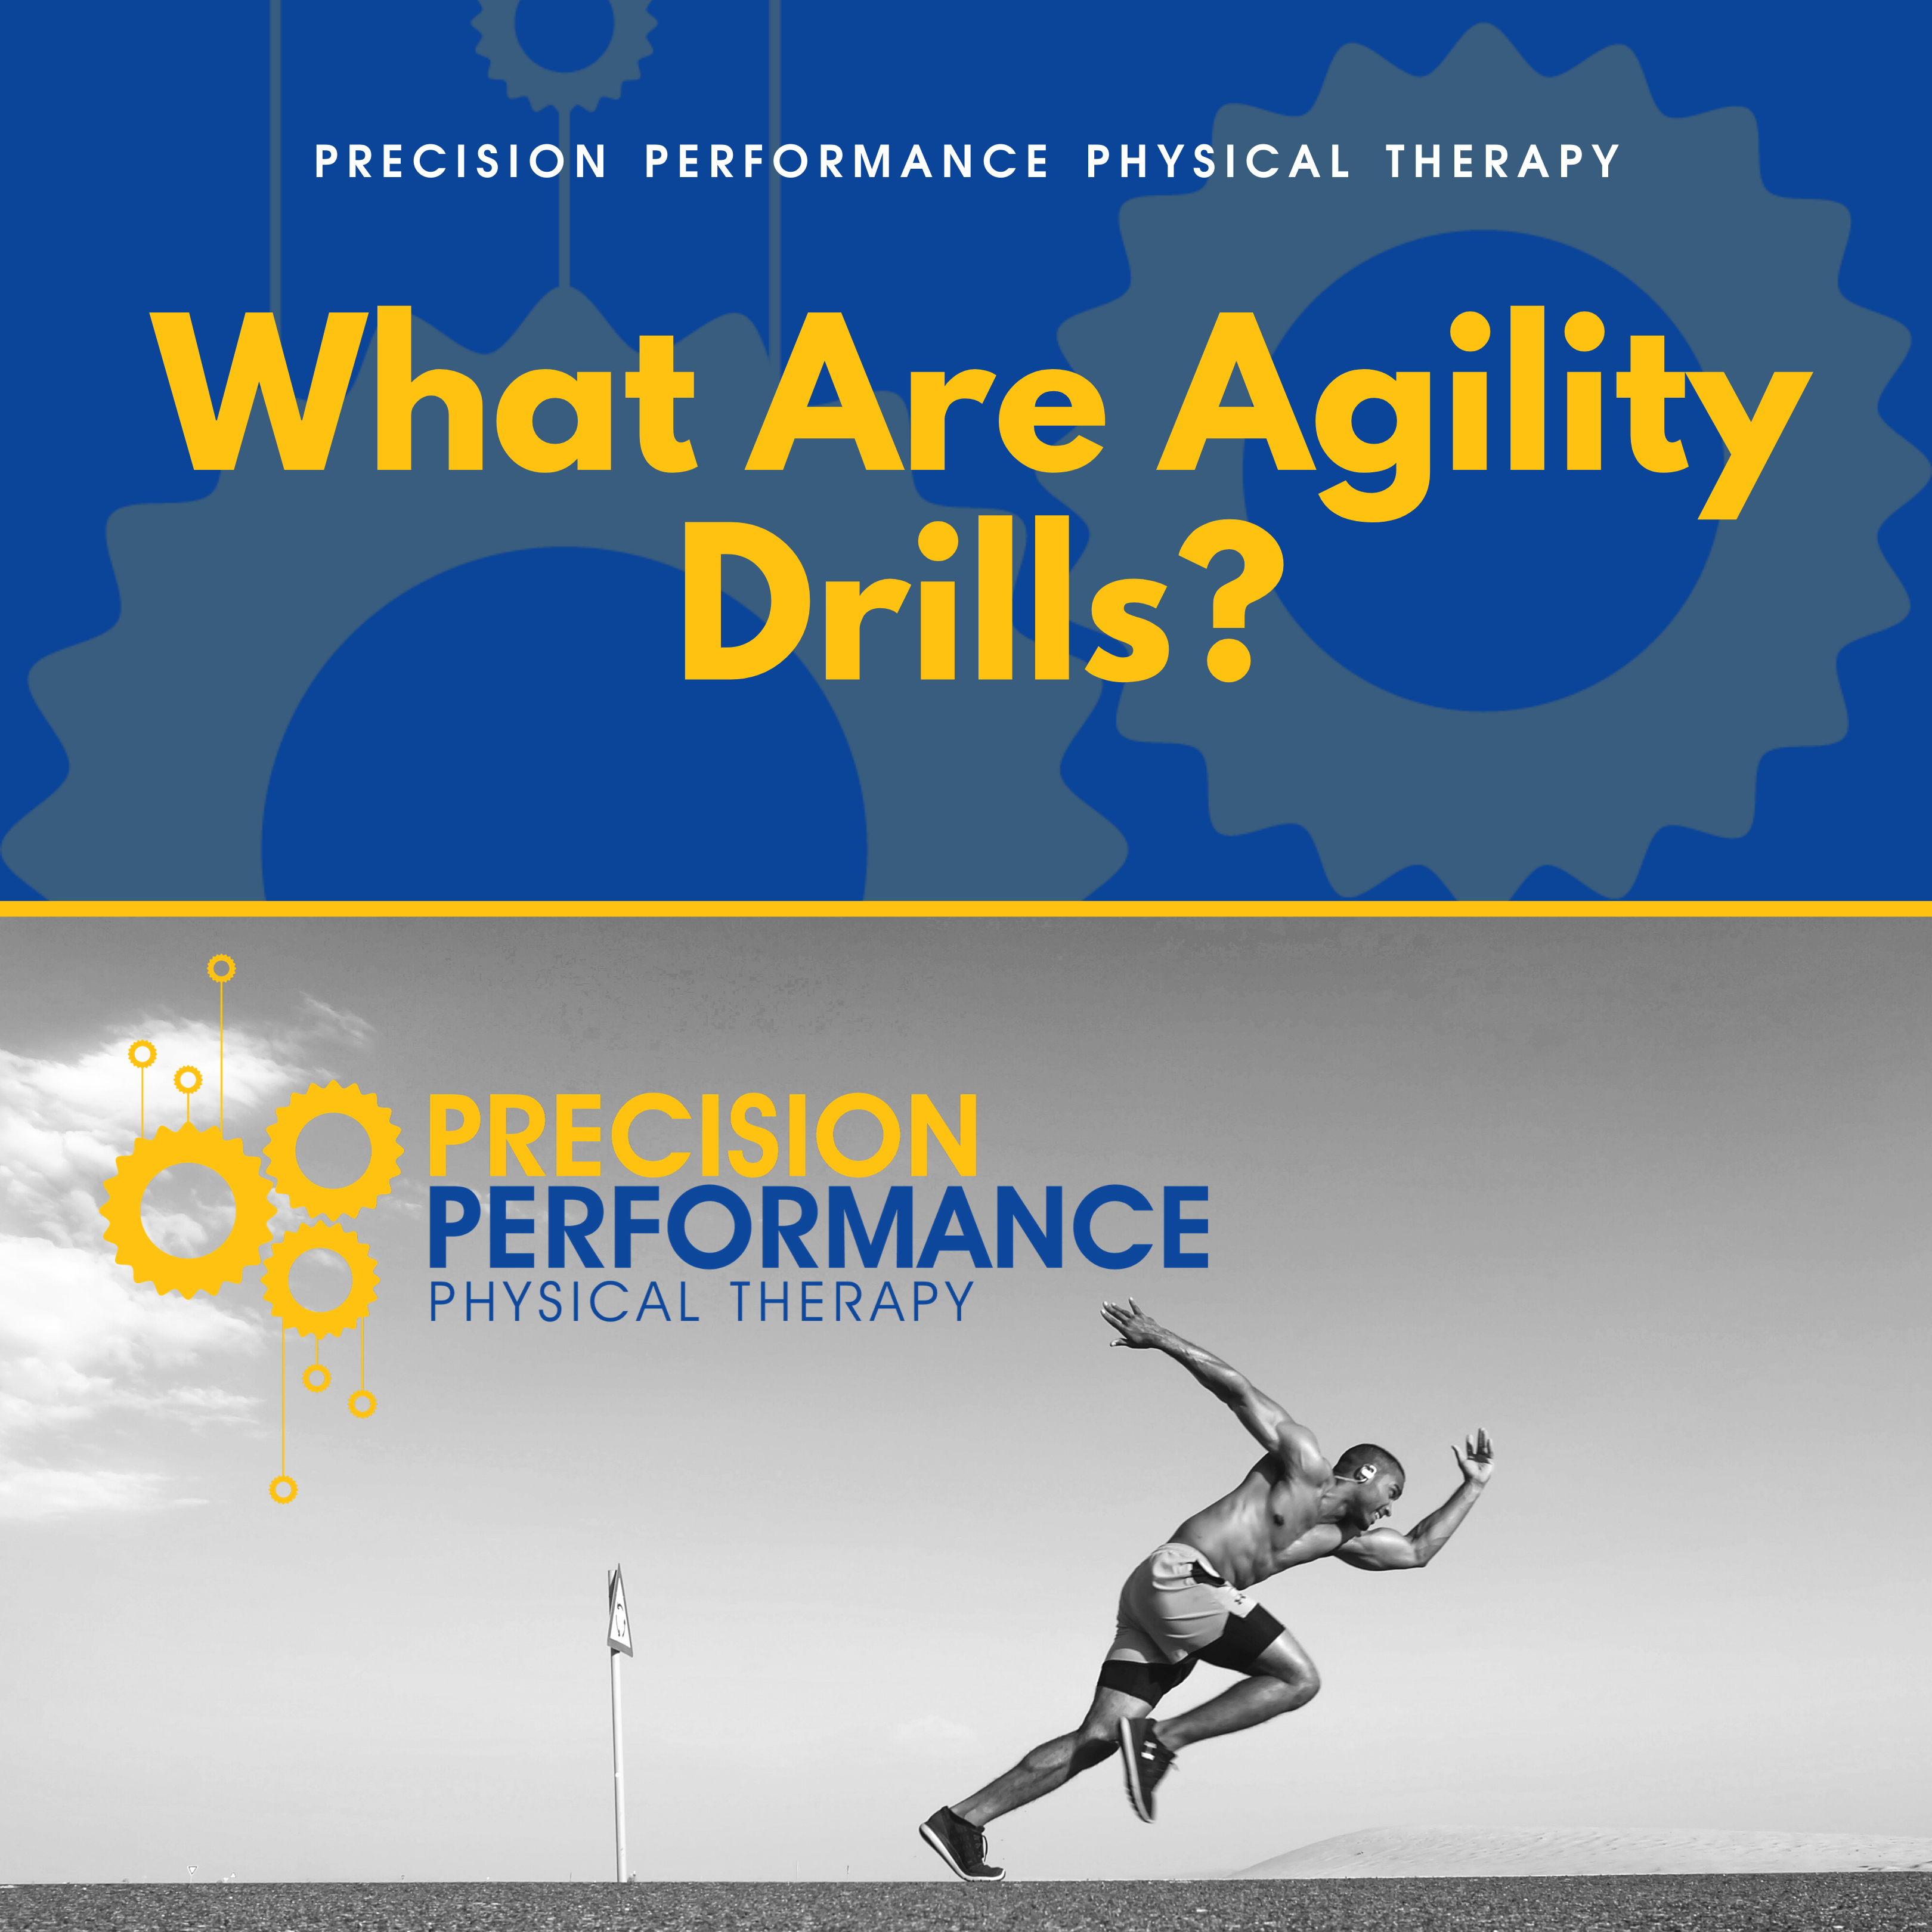 Drill agility 6 Best